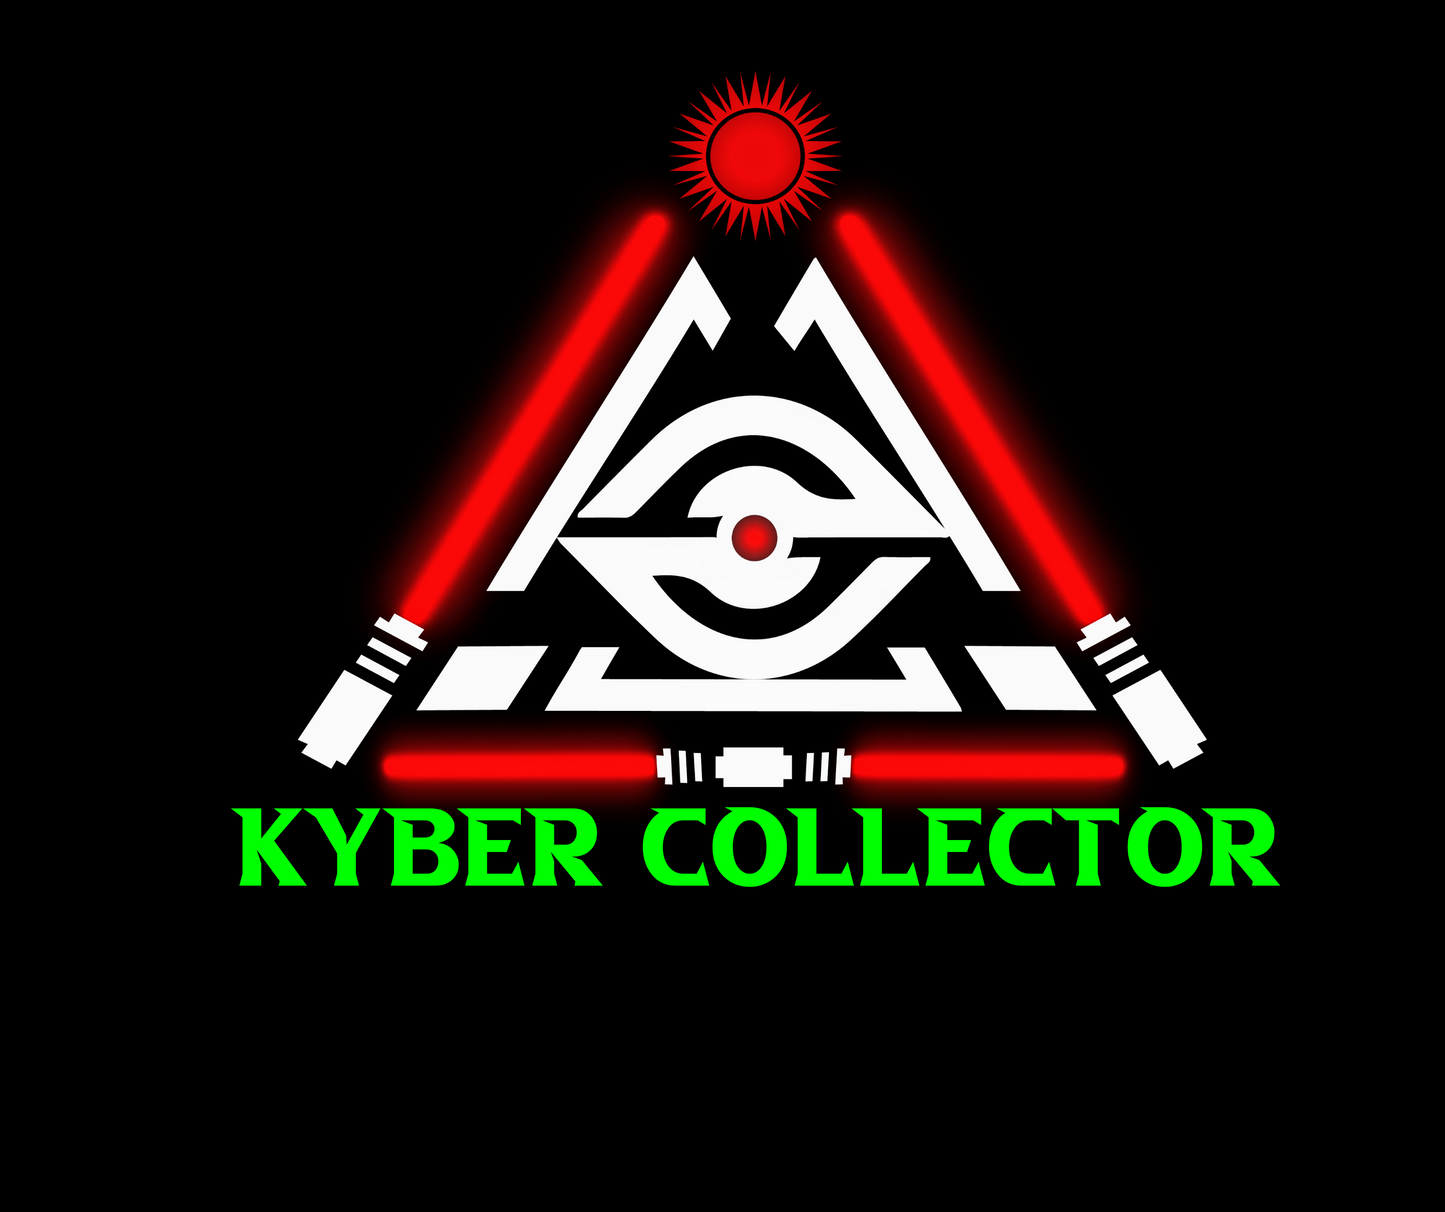 Kyber Collector